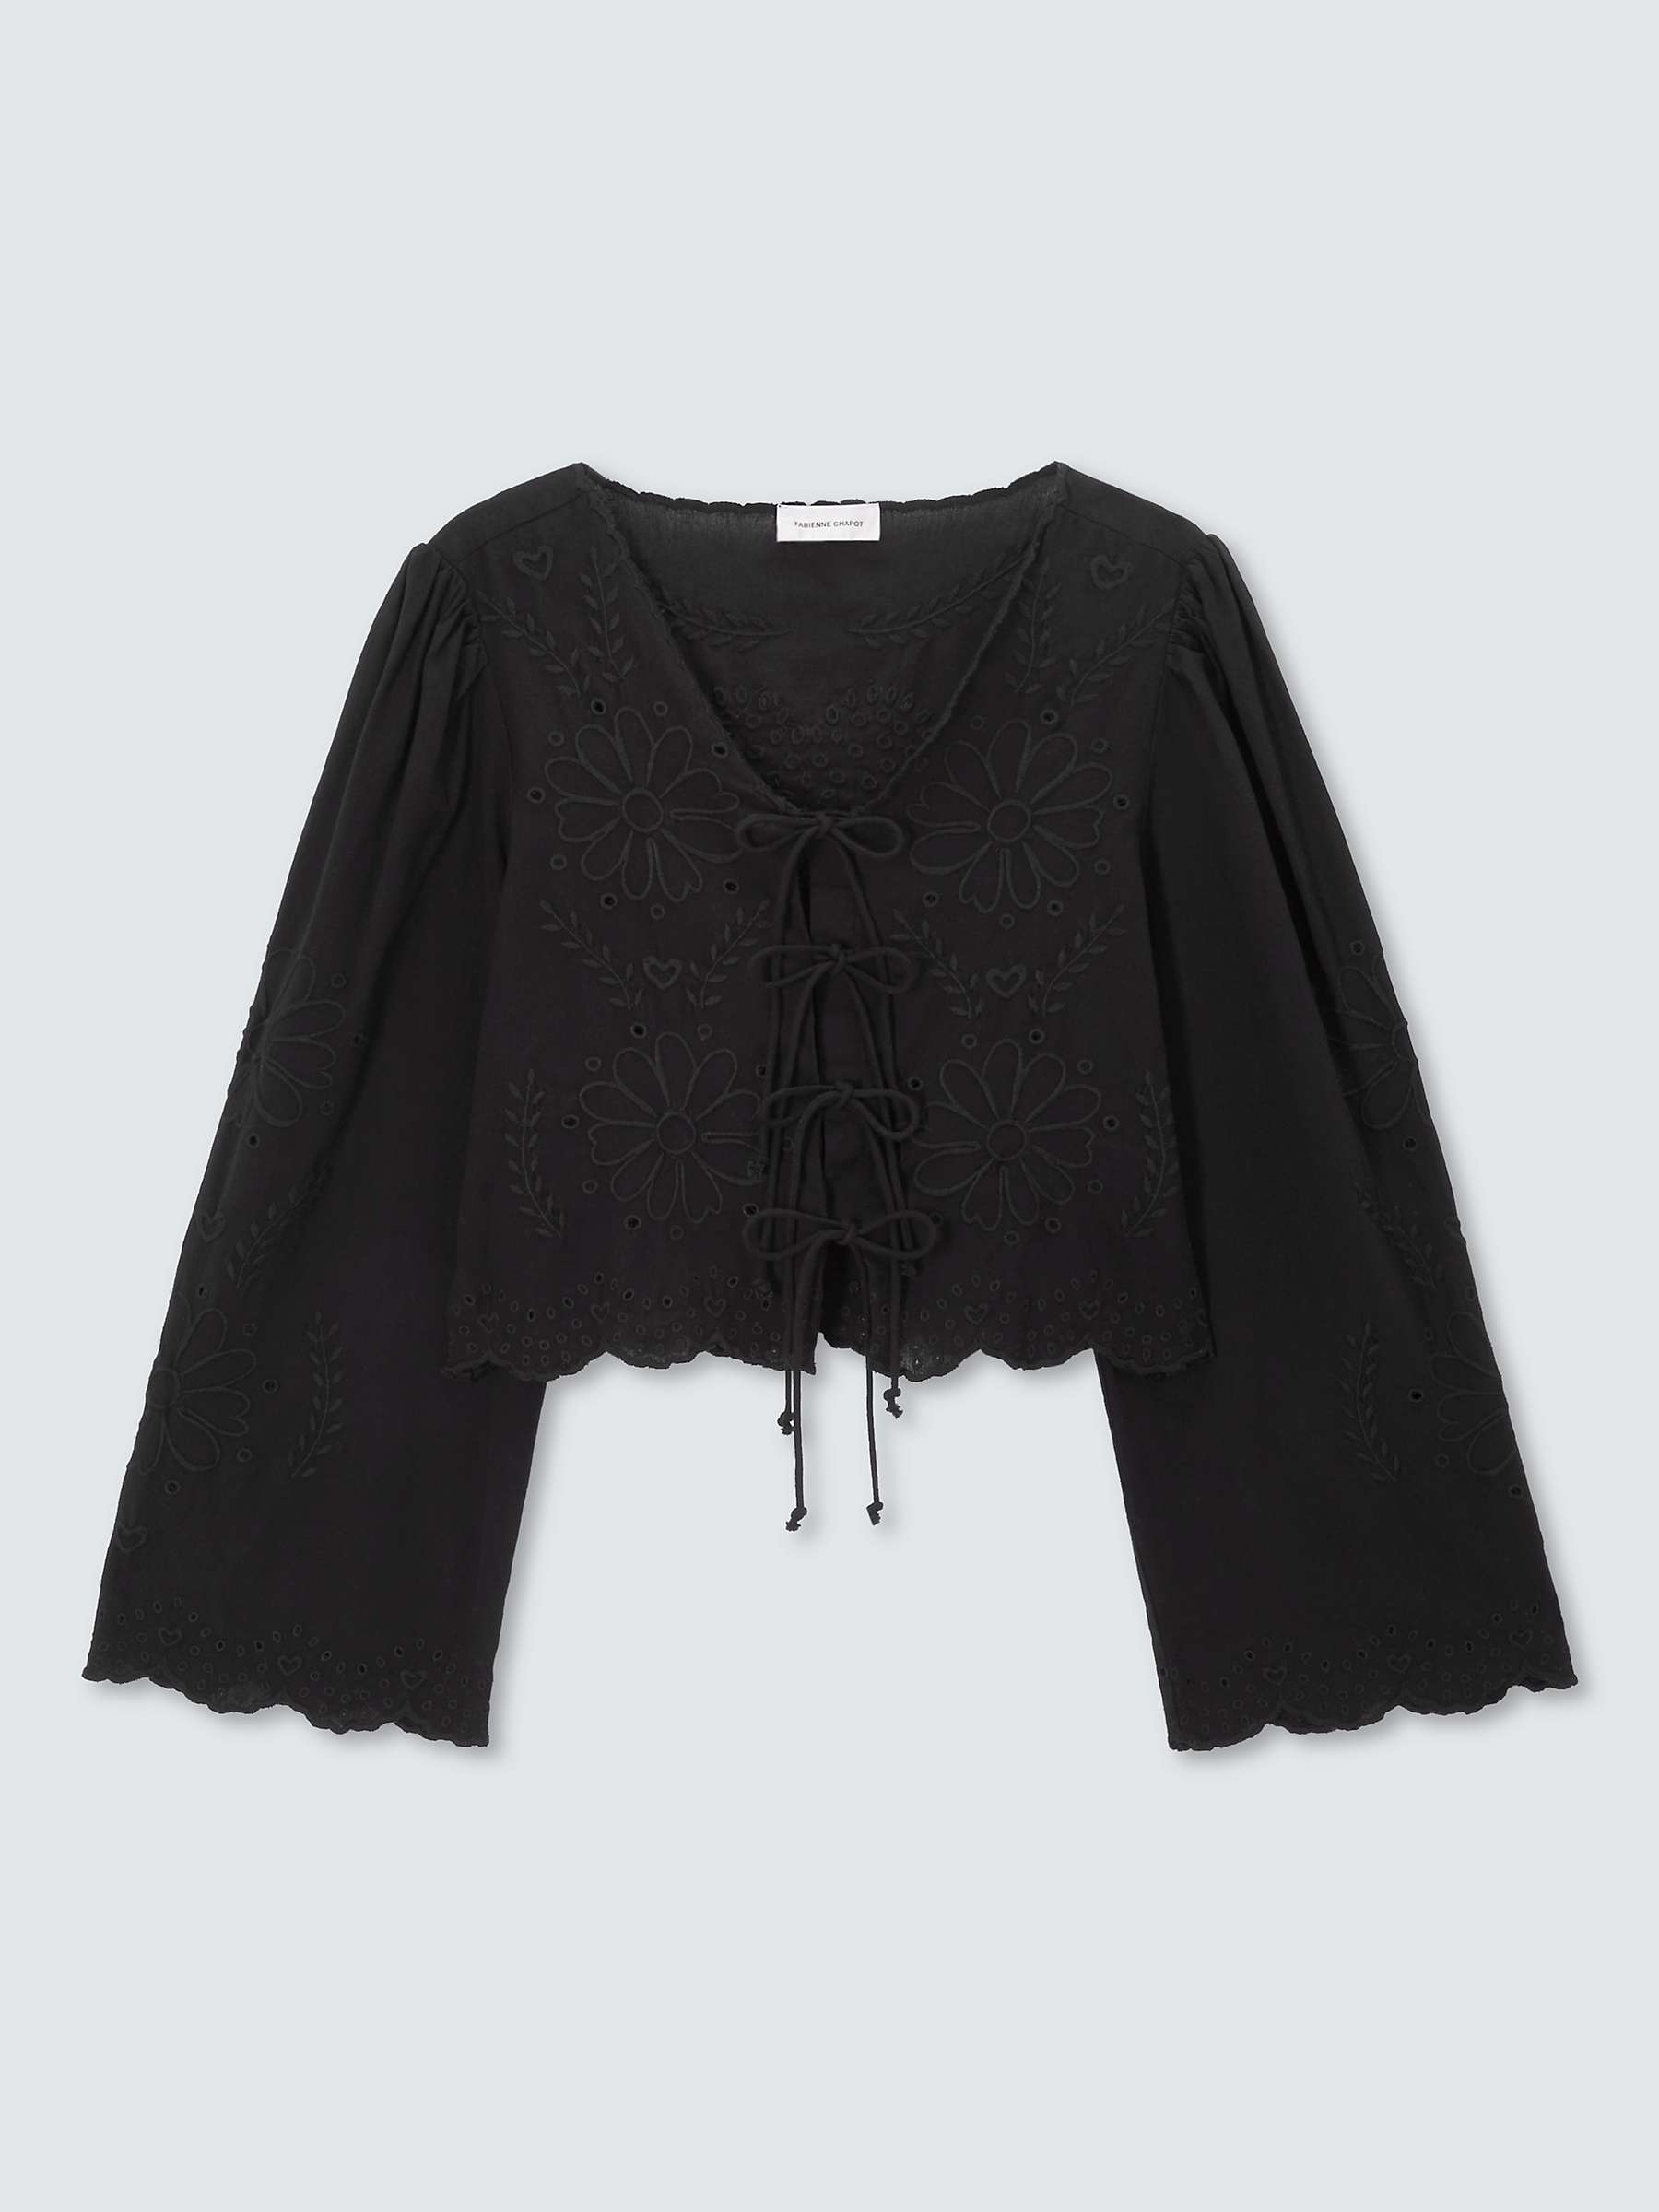 Buy Fabienne Chapot Sterre Embroidered Front Tie Blouse, Black Online at johnlewis.com